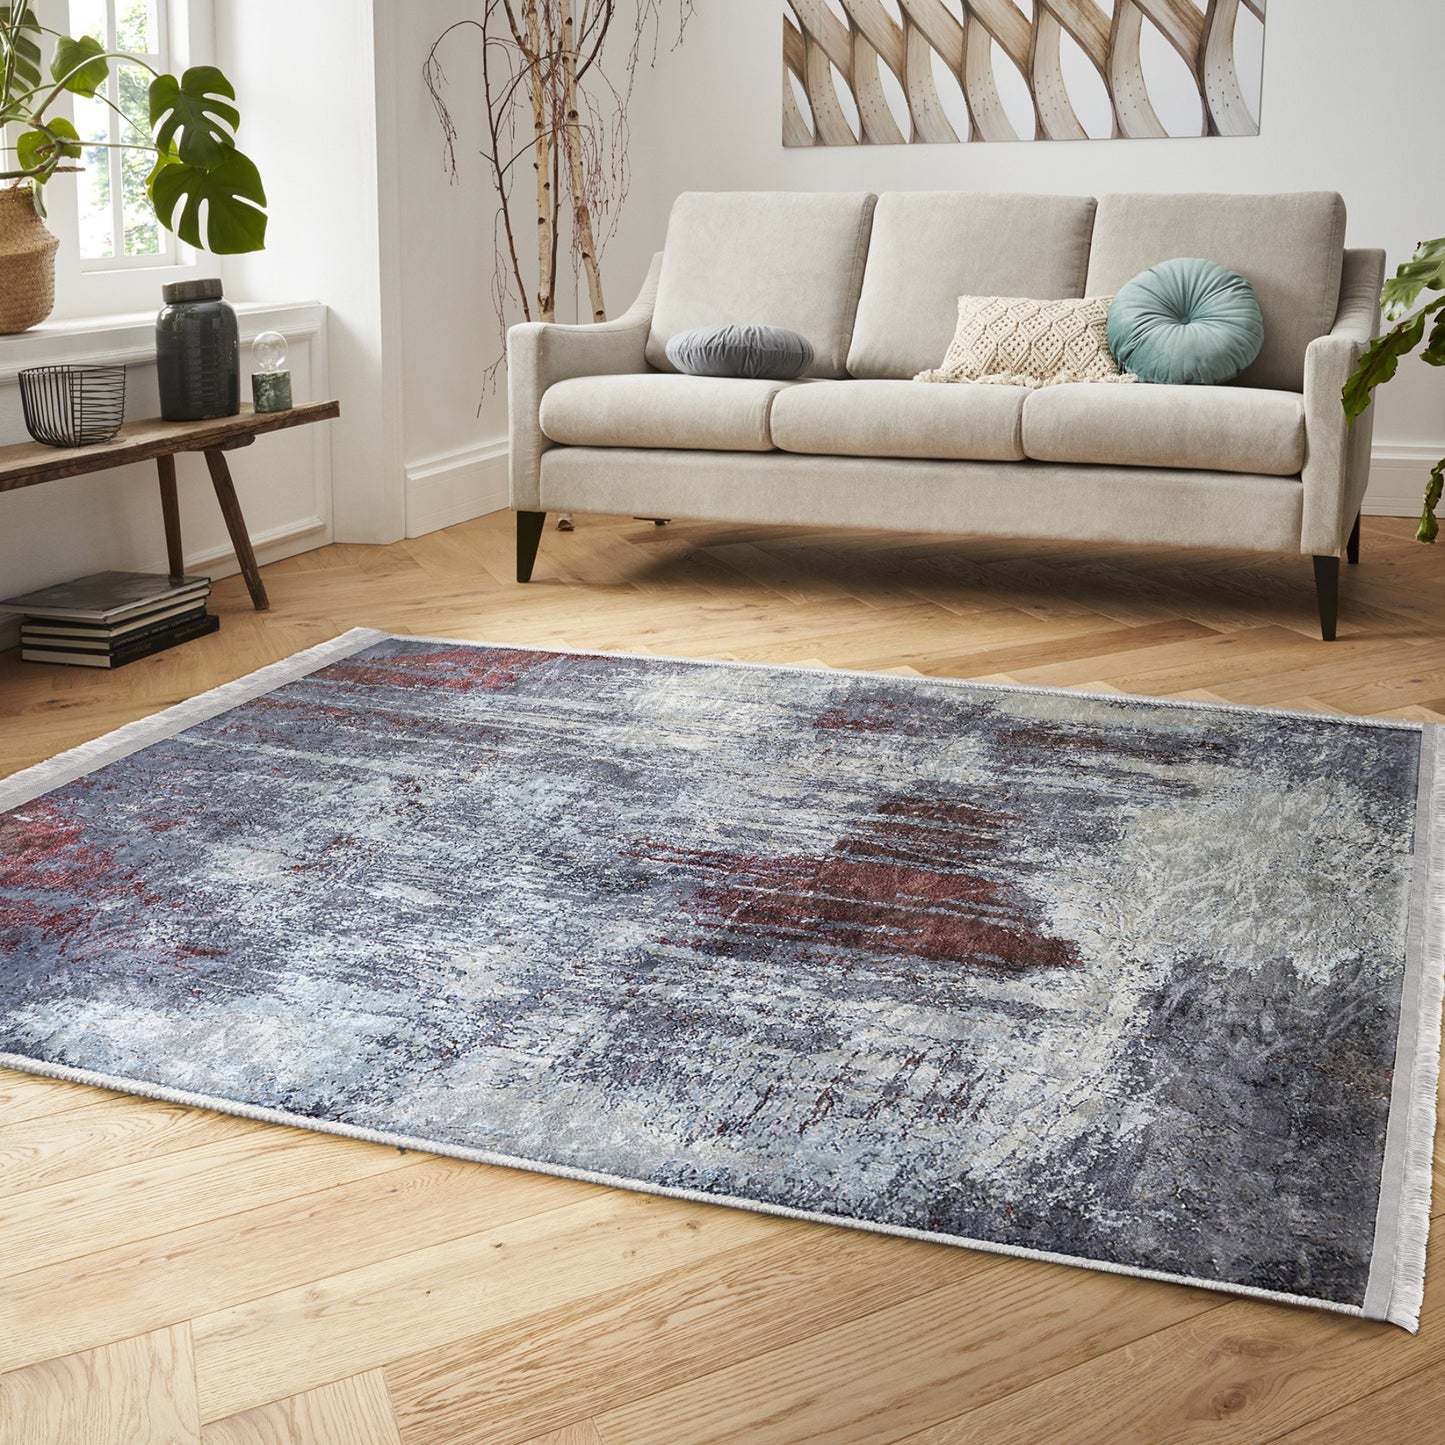 Stylish Rug with Decorative Rustic Pattern